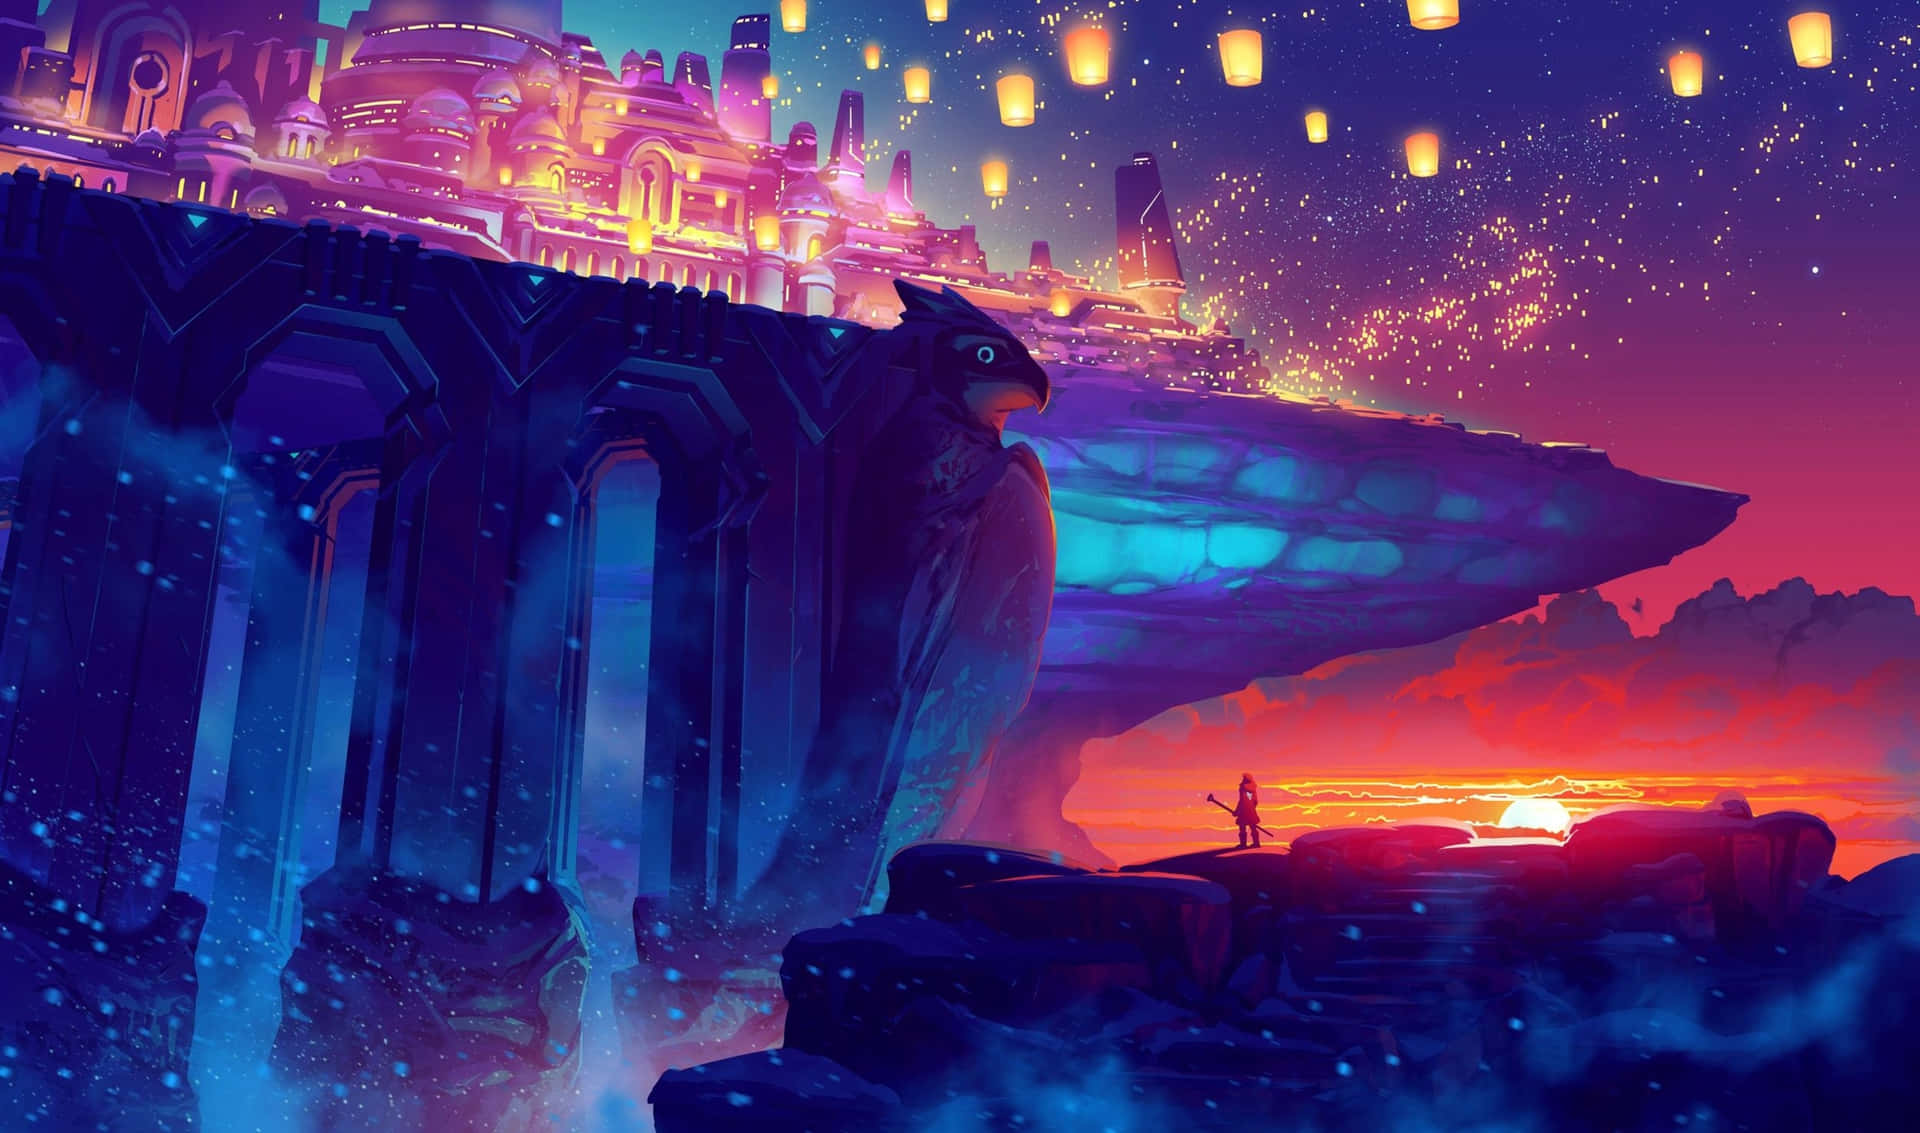 A Fantasy Landscape With A Castle And Lanterns